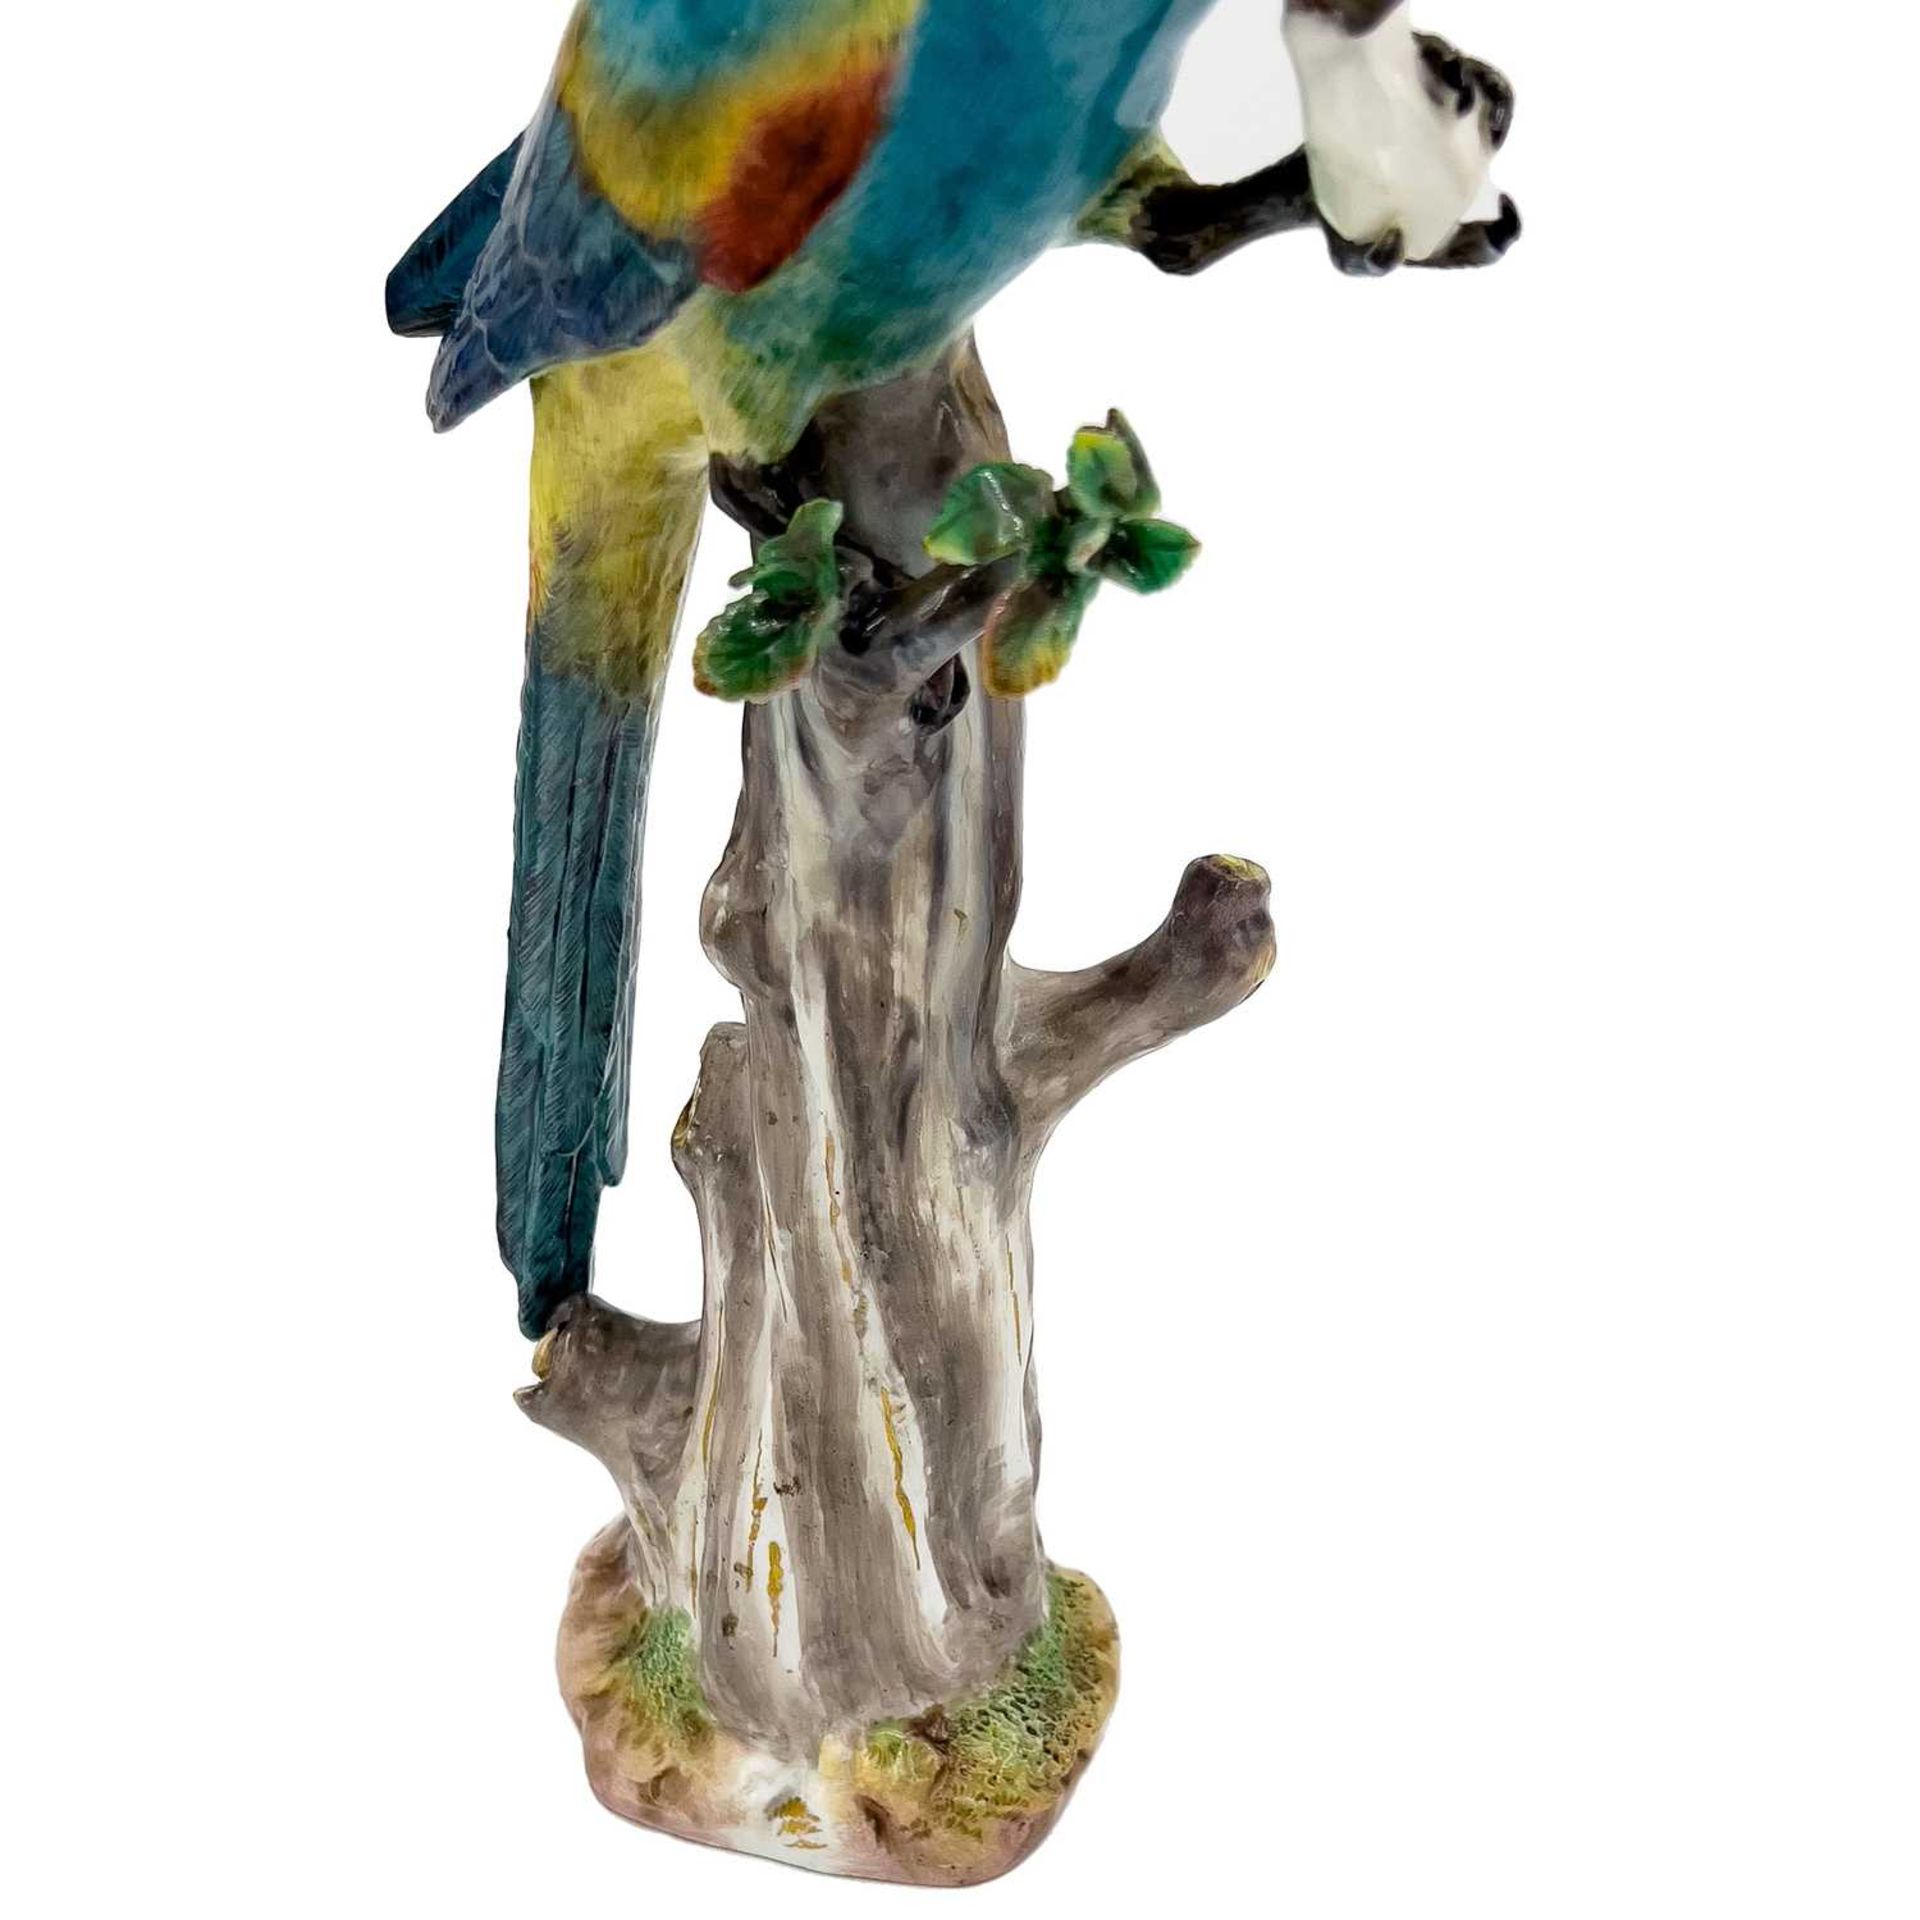 MEISSEN: A 19TH CENTURY PORCELAIN MODEL OF A PARROT EATING FRUIT - Image 4 of 7